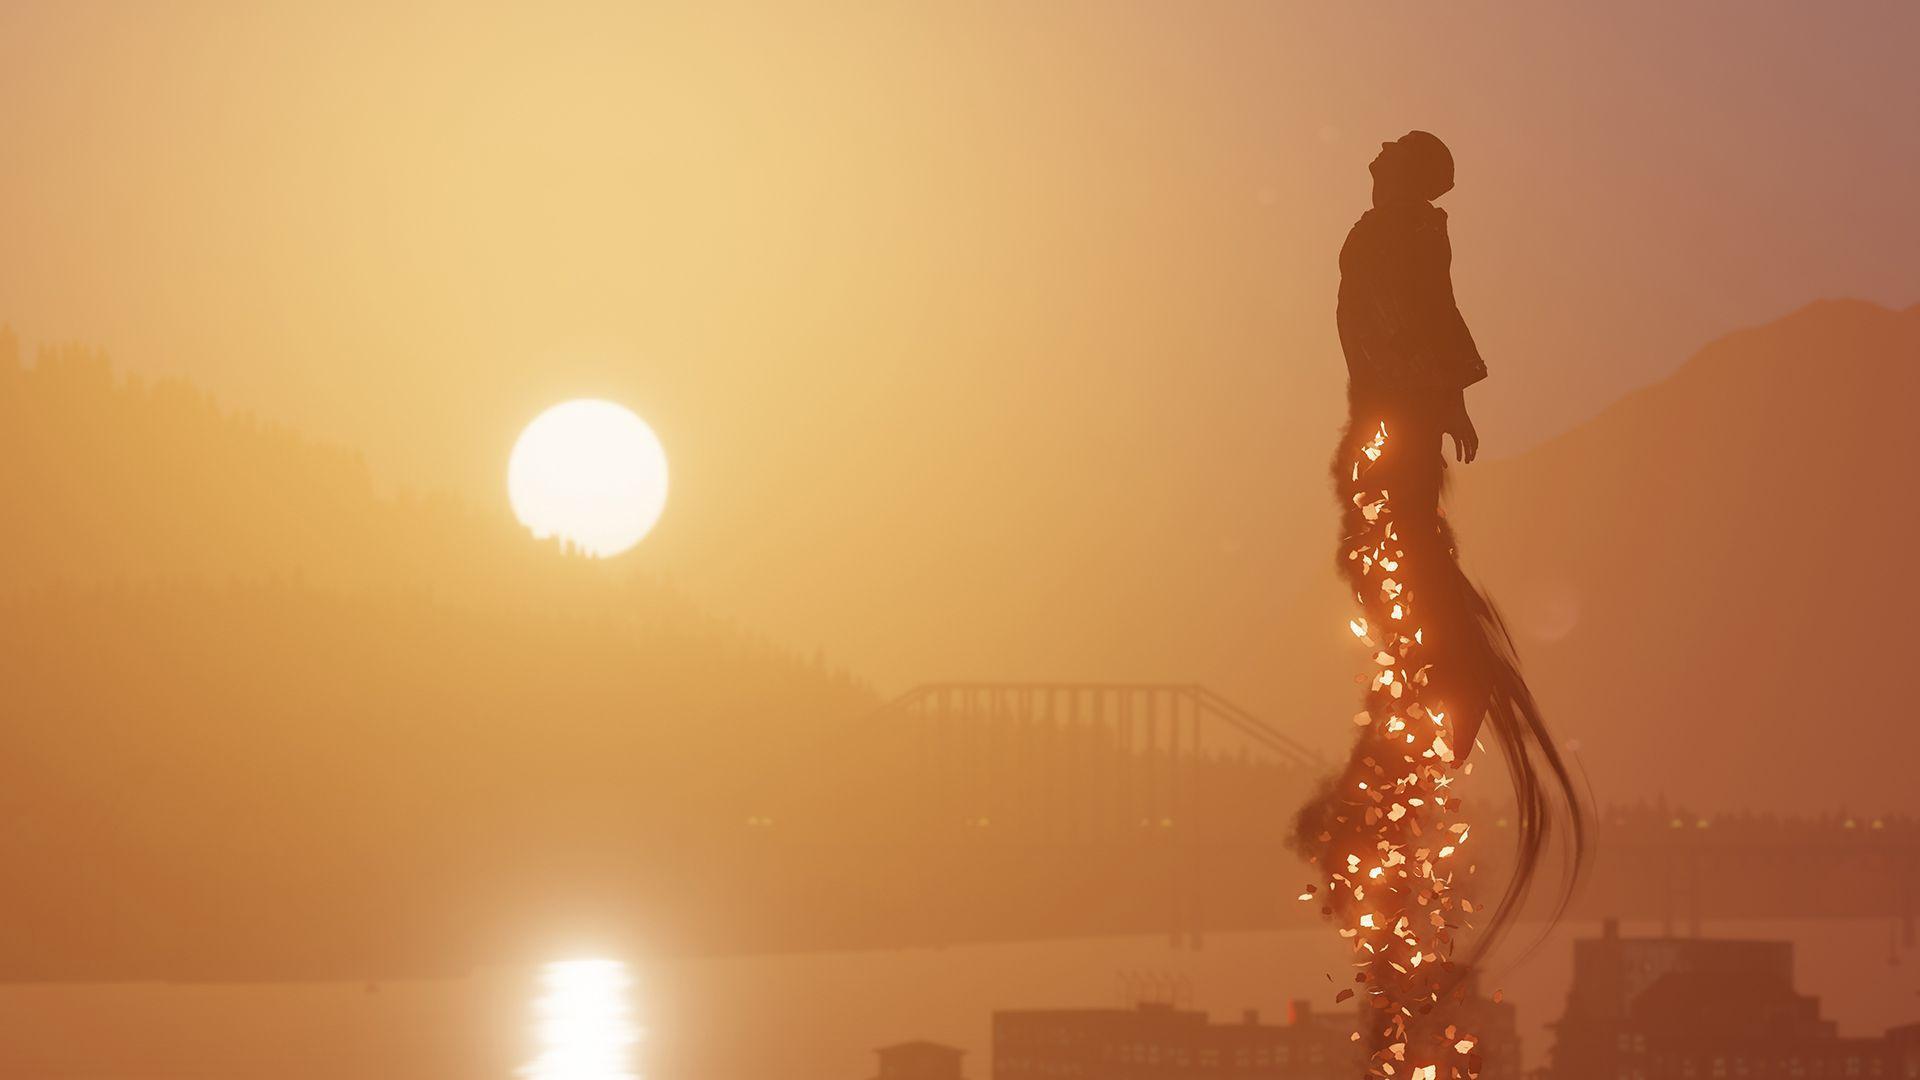 Infamous Second Son Wallpaper HD